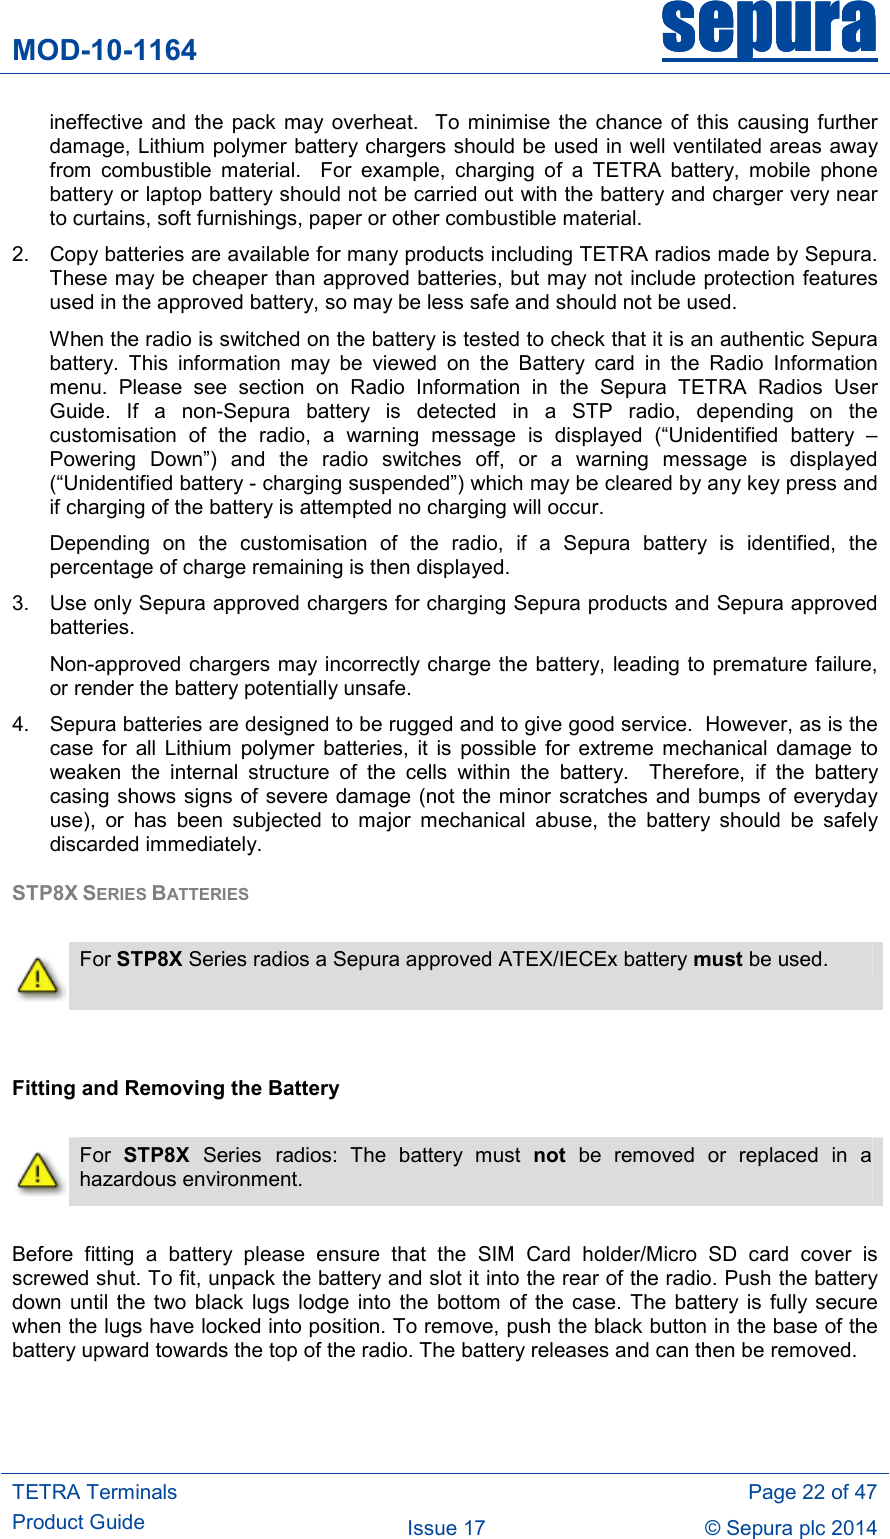 MOD-10-1164 sepurasepurasepurasepura     TETRA Terminals Product Guide   Page 22 of 47 Issue 17  © Sepura plc 2014   ineffective  and the  pack may  overheat.  To  minimise  the  chance of  this causing  further damage, Lithium polymer battery chargers should be used in well ventilated areas away from  combustible  material.    For  example,  charging  of  a  TETRA  battery,  mobile  phone battery or laptop battery should not be carried out with the battery and charger very near to curtains, soft furnishings, paper or other combustible material. 2.  Copy batteries are available for many products including TETRA radios made by Sepura.  These may be cheaper than approved batteries, but may not include protection features used in the approved battery, so may be less safe and should not be used.  When the radio is switched on the battery is tested to check that it is an authentic Sepura battery.  This  information  may  be  viewed  on  the  Battery  card  in  the  Radio  Information menu.  Please  see  section  on  Radio  Information  in  the  Sepura  TETRA  Radios  User Guide.  If  a  non-Sepura  battery  is  detected  in  a  STP  radio,  depending  on  the customisation  of  the  radio,  a  warning  message  is  displayed  (“Unidentified  battery  – Powering  Down”)  and  the  radio  switches  off,  or  a  warning  message  is  displayed (“Unidentified battery - charging suspended”) which may be cleared by any key press and if charging of the battery is attempted no charging will occur. Depending  on  the  customisation  of  the  radio,  if  a  Sepura  battery  is  identified,  the percentage of charge remaining is then displayed. 3.  Use only Sepura approved chargers for charging Sepura products and Sepura approved batteries.  Non-approved chargers may incorrectly charge the battery, leading to premature failure, or render the battery potentially unsafe.   4.  Sepura batteries are designed to be rugged and to give good service.  However, as is the case  for  all  Lithium  polymer  batteries,  it  is  possible  for  extreme  mechanical  damage  to weaken  the  internal  structure  of  the  cells  within  the  battery.    Therefore,  if  the  battery casing shows signs of severe damage (not the minor scratches  and bumps of everyday use),  or  has  been  subjected  to  major  mechanical  abuse,  the  battery  should  be  safely discarded immediately. STP8X SERIES BATTERIES    For STP8X Series radios a Sepura approved ATEX/IECEx battery must be used.   Fitting and Removing the Battery   For  STP8X  Series radios:  The  battery  must  not  be  removed  or  replaced  in  a hazardous environment.  Before  fitting  a  battery  please  ensure  that  the  SIM  Card  holder/Micro  SD  card  cover  is screwed shut. To fit, unpack the battery and slot it into the rear of the radio. Push the battery down  until the  two  black  lugs  lodge  into  the bottom of  the  case.  The battery is  fully secure when the lugs have locked into position. To remove, push the black button in the base of the battery upward towards the top of the radio. The battery releases and can then be removed.  